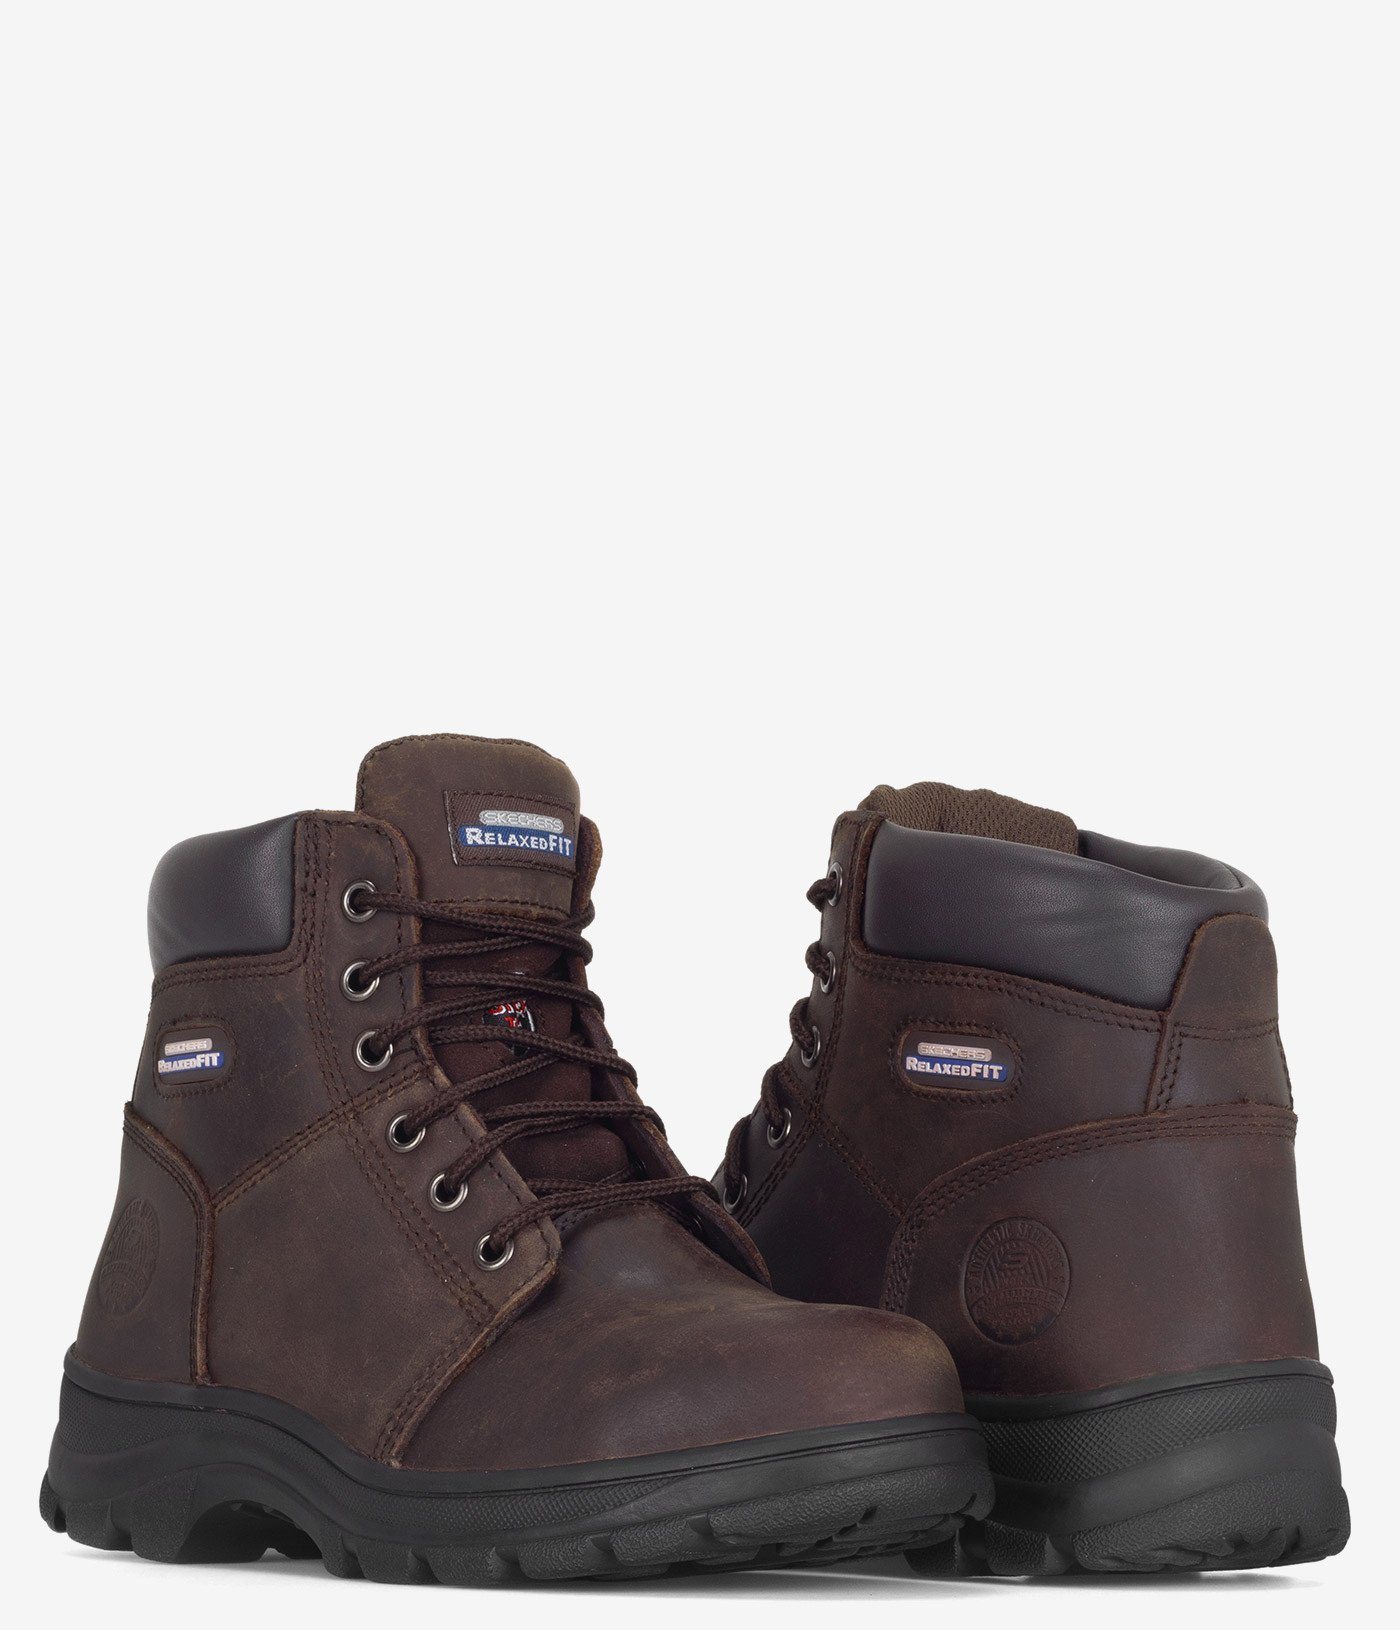 Skechers Workshire Peril Relaxed Fit Safety Toe Boot